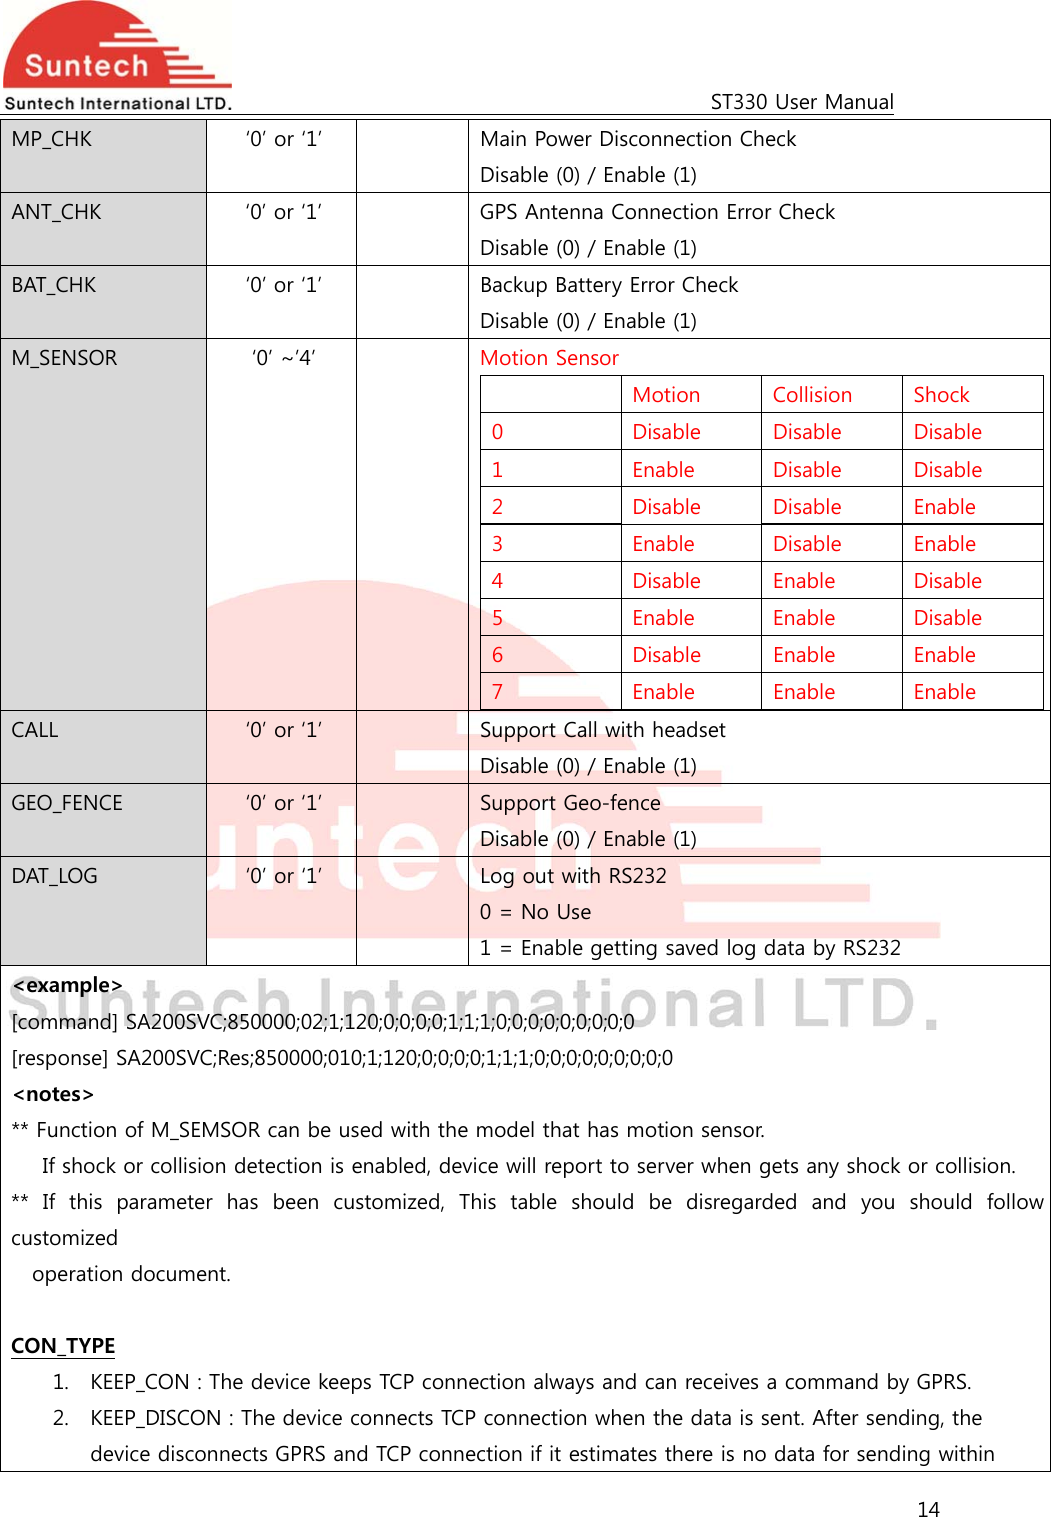                                                                                             ST330 User Manual 14  MP_CHK  ‘0’ or ‘1’    Main Power Disconnection Check Disable (0) / Enable (1) ANT_CHK  ‘0’ or ‘1’    GPS Antenna Connection Error Check Disable (0) / Enable (1) BAT_CHK  ‘0’ or ‘1’    Backup Battery Error Check Disable (0) / Enable (1) M_SENSOR  ‘0’ ~’4’    Motion Sensor   Motion  Collision  Shock 0  Disable  Disable  Disable 1  Enable  Disable  Disable 2  Disable  Disable  Enable 3  Enable  Disable  Enable 4  Disable  Enable  Disable 5  Enable  Enable  Disable 6  Disable  Enable  Enable 7  Enable  Enable  Enable CALL  ‘0’ or ‘1’    Support Call with headset Disable (0) / Enable (1) GEO_FENCE  ‘0’ or ‘1’    Support Geo-fence Disable (0) / Enable (1) DAT_LOG  ‘0’ or ‘1’    Log out with RS232 0 = No Use 1 = Enable getting saved log data by RS232 &lt;example&gt; [command] SA200SVC;850000;02;1;120;0;0;0;0;1;1;1;0;0;0;0;0;0;0;0;0 [response] SA200SVC;Res;850000;010;1;120;0;0;0;0;1;1;1;0;0;0;0;0;0;0;0;0 &lt;notes&gt; ** Function of M_SEMSOR can be used with the model that has motion sensor.       If shock or collision detection is enabled, device will report to server when gets any shock or collision. **  If  this  parameter  has  been  customized,  This  table  should  be  disregarded  and  you  should  follow customized   operation document.  CON_TYPE 1. KEEP_CON : The device keeps TCP connection always and can receives a command by GPRS. 2. KEEP_DISCON : The device connects TCP connection when the data is sent. After sending, the device disconnects GPRS and TCP connection if it estimates there is no data for sending within 